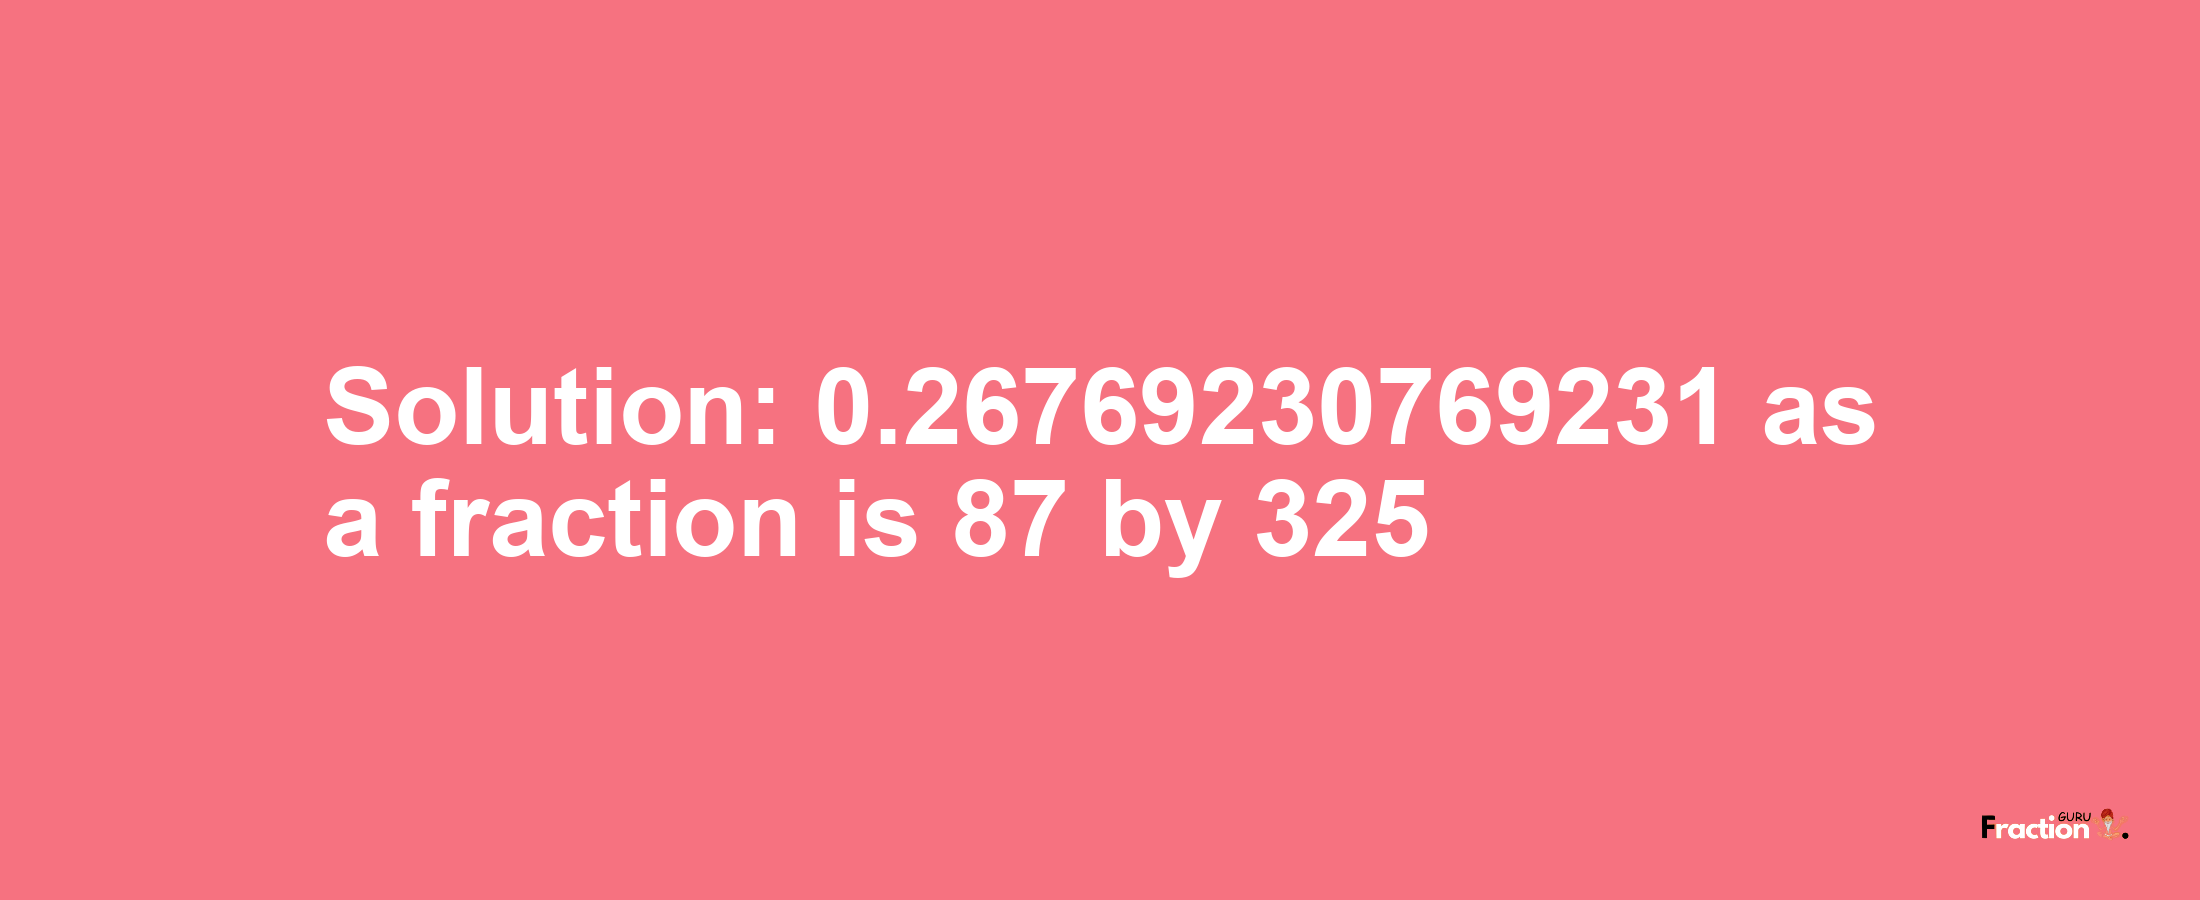 Solution:0.26769230769231 as a fraction is 87/325